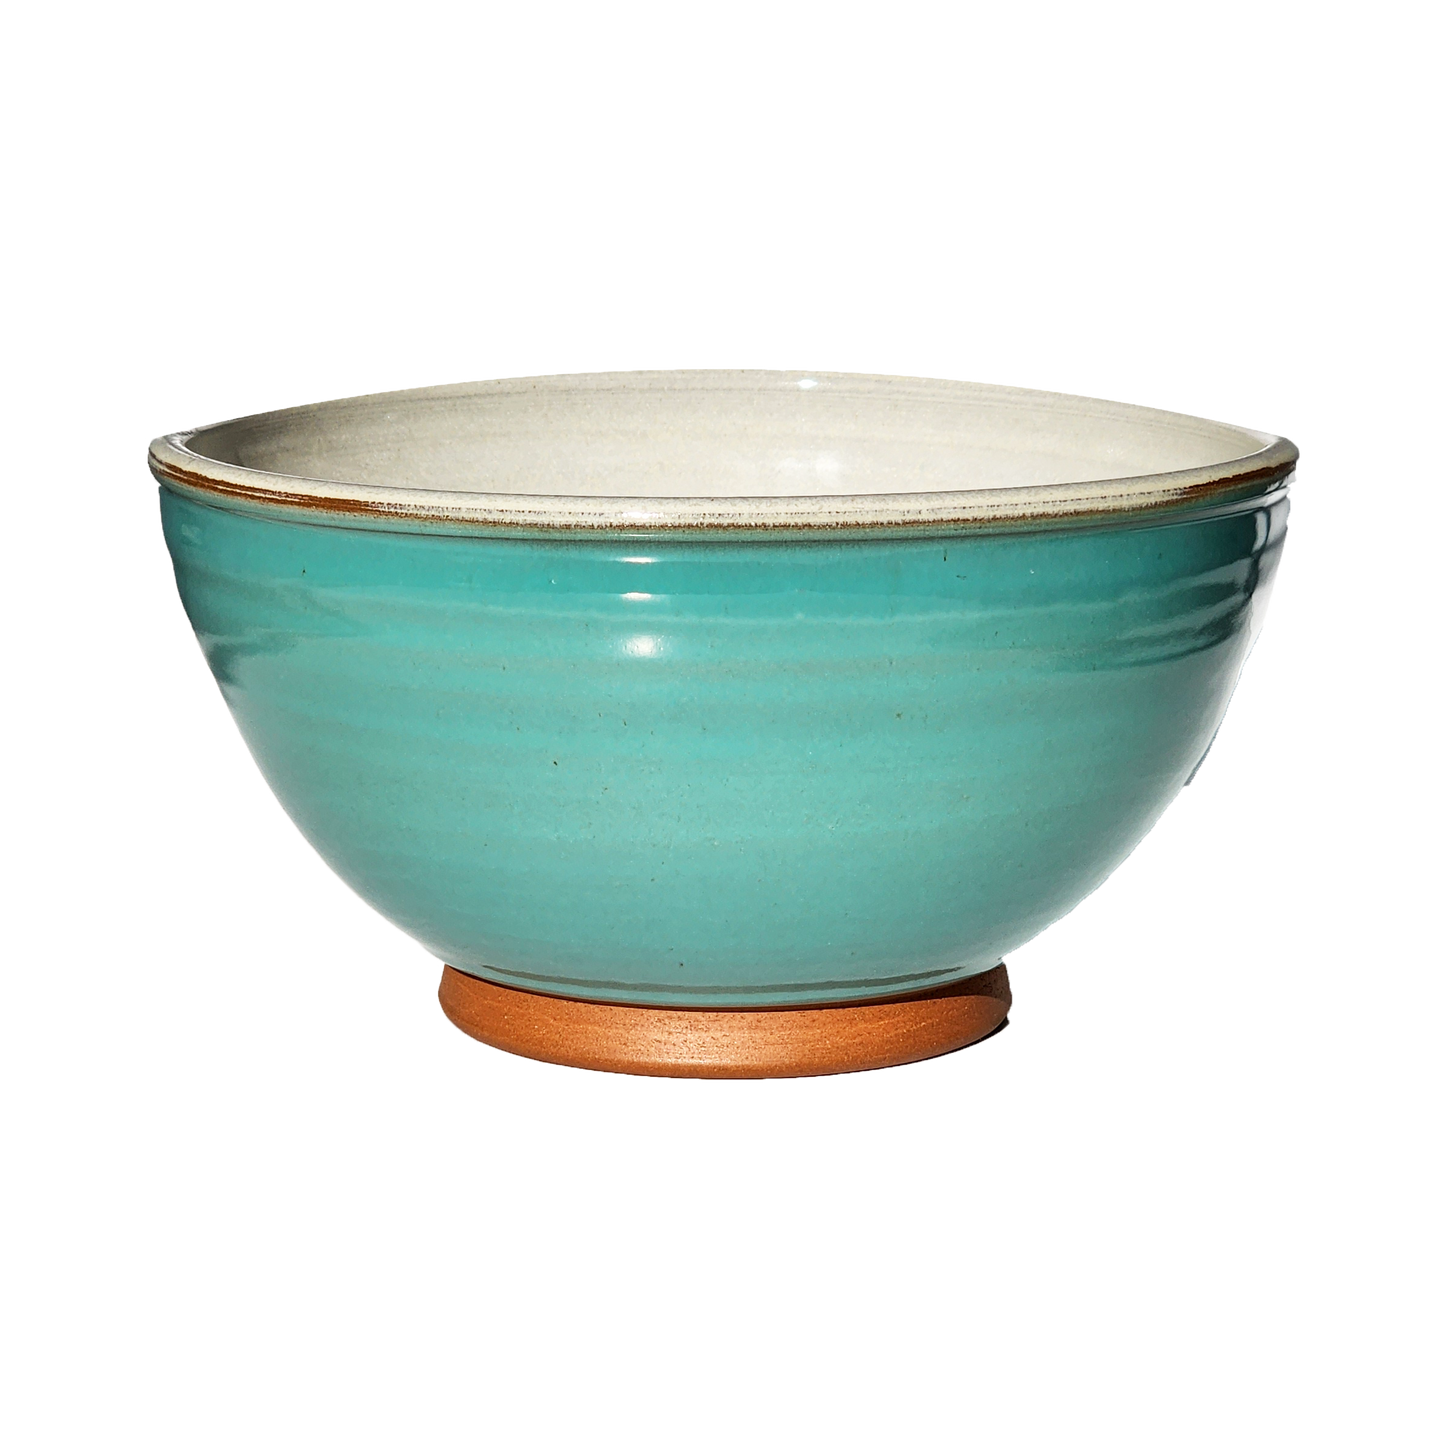 Image: A large mixing bowl in tranquil sky blue, providing ample room with a capacity of 12.5 cups. Bring a sense of calm and serenity to your culinary endeavors.